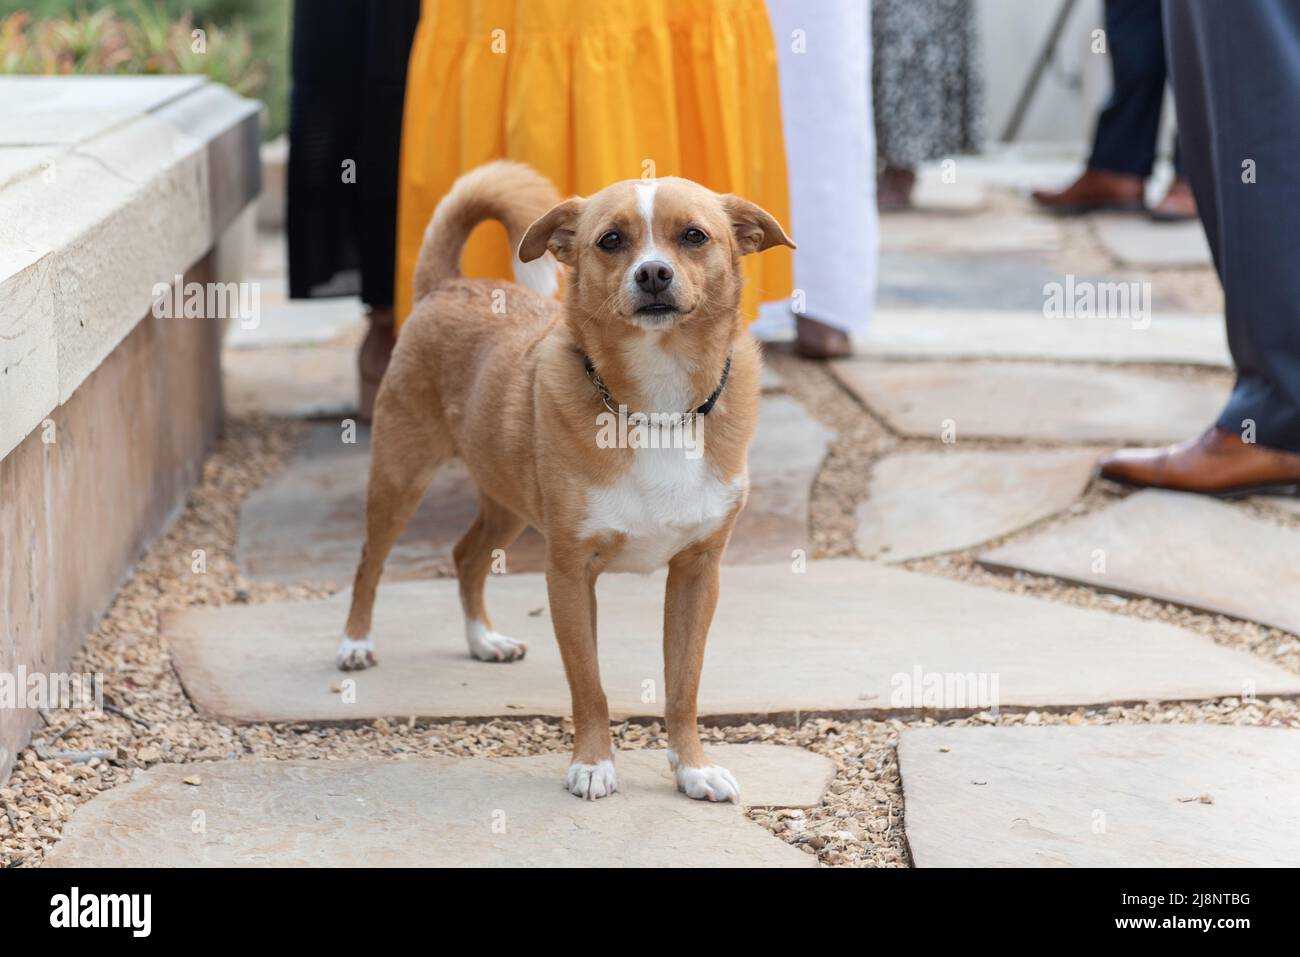 Alert pet Chihuahua dog navigates among the party guests without being stepped on. Stock Photo